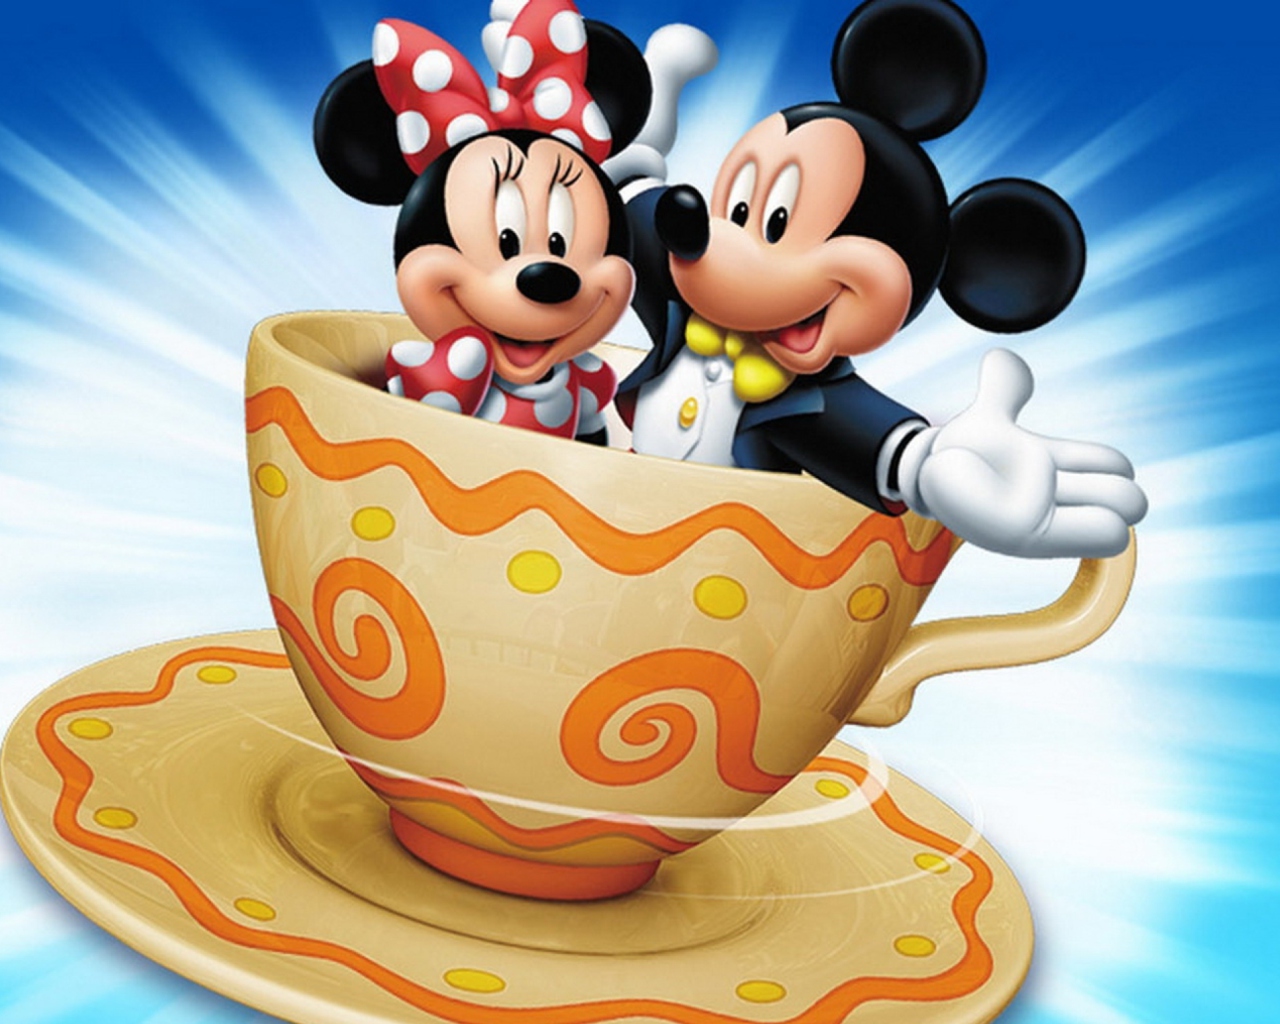 Mickey Mouse wallpaper 1280x1024